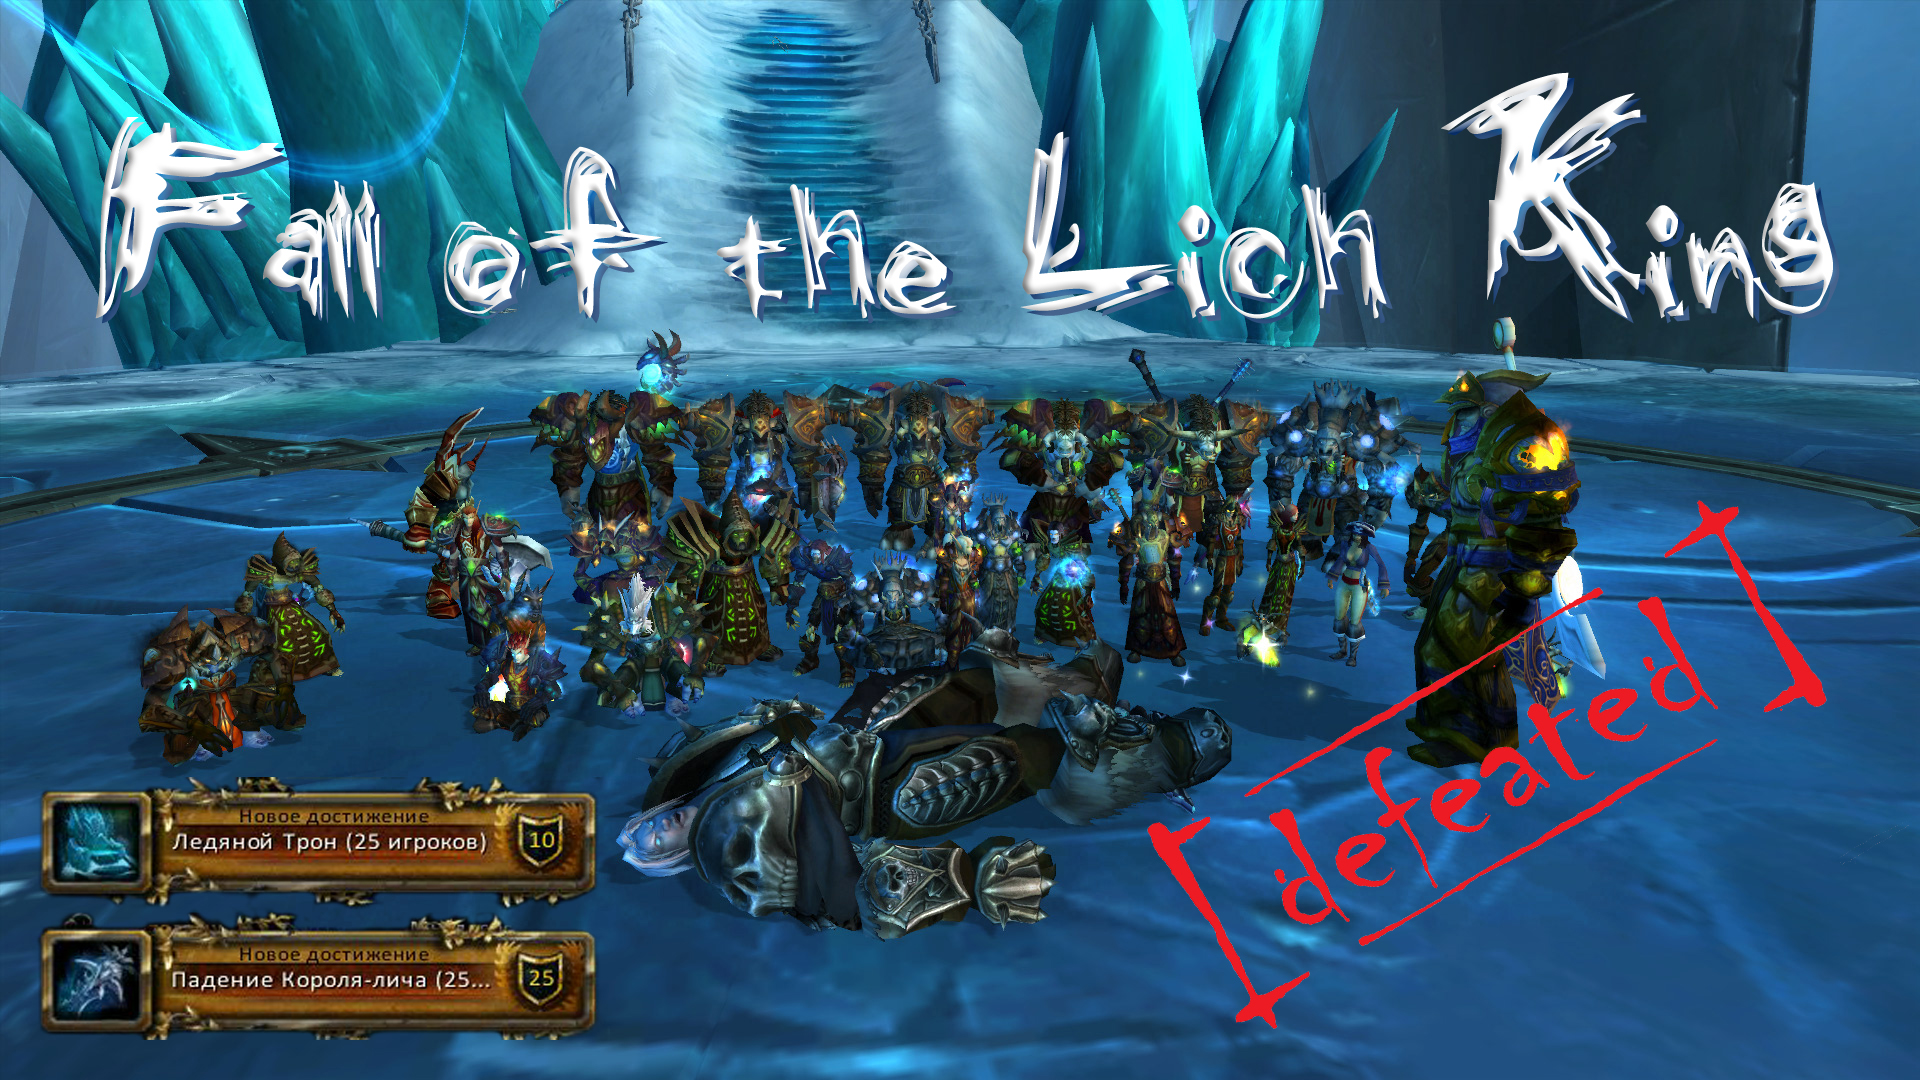 Fail of the lich king